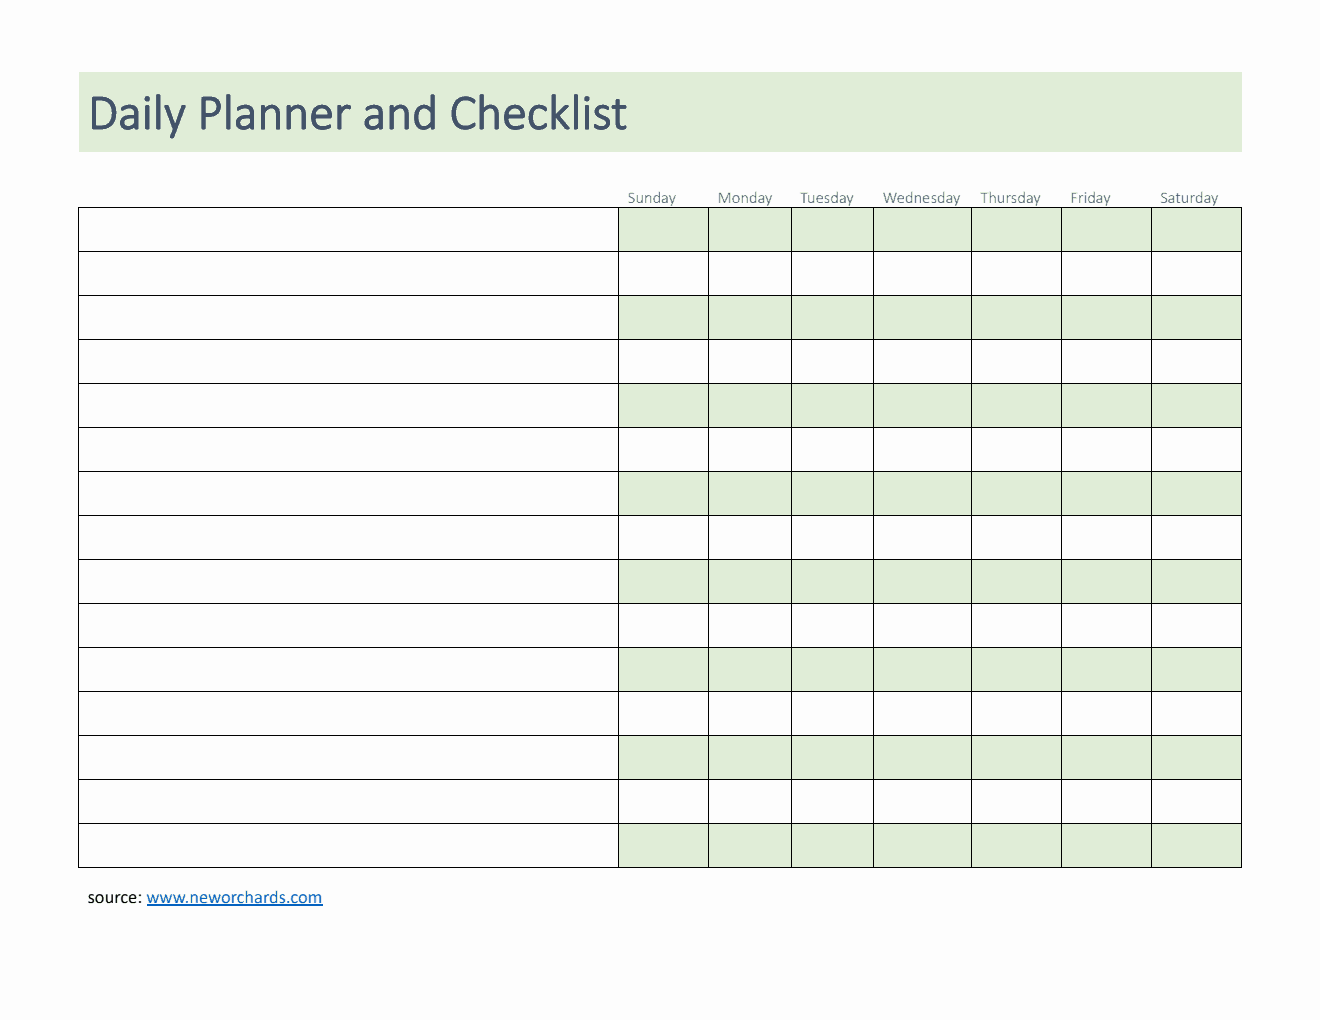 Daily Planner and Checklist Template in Word (Downloadable)